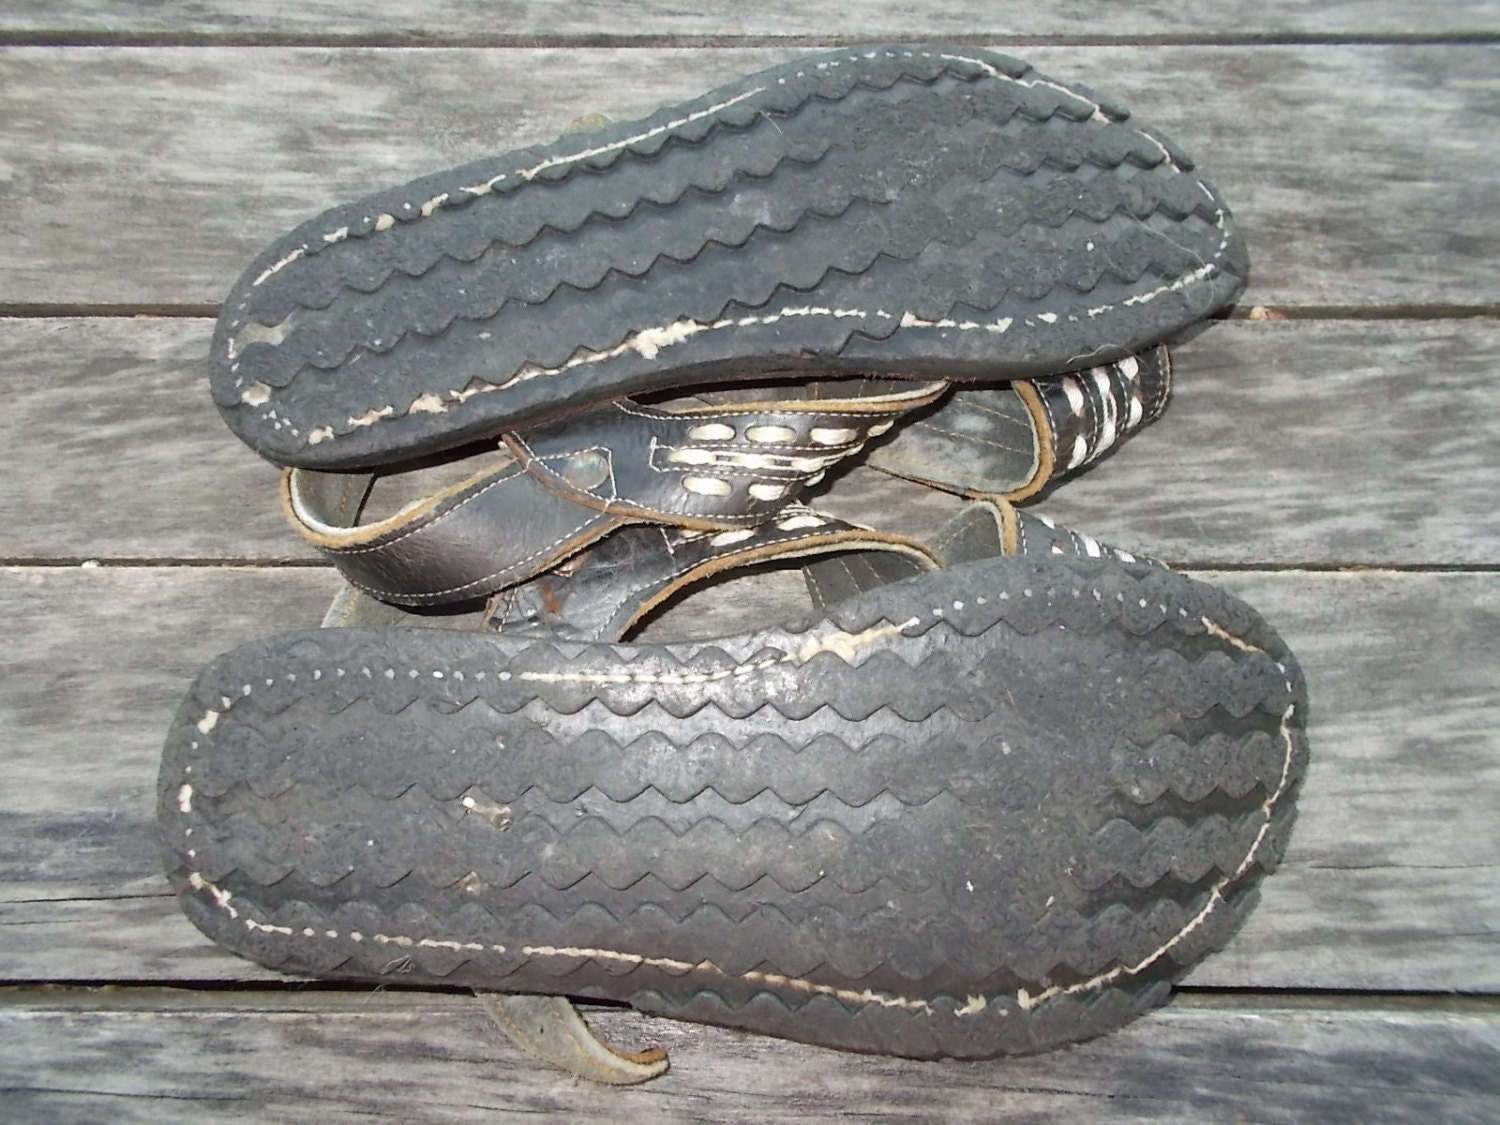 Vintage Huaraches Mexican Sandals  Rubber  Tire  Soles Rare and